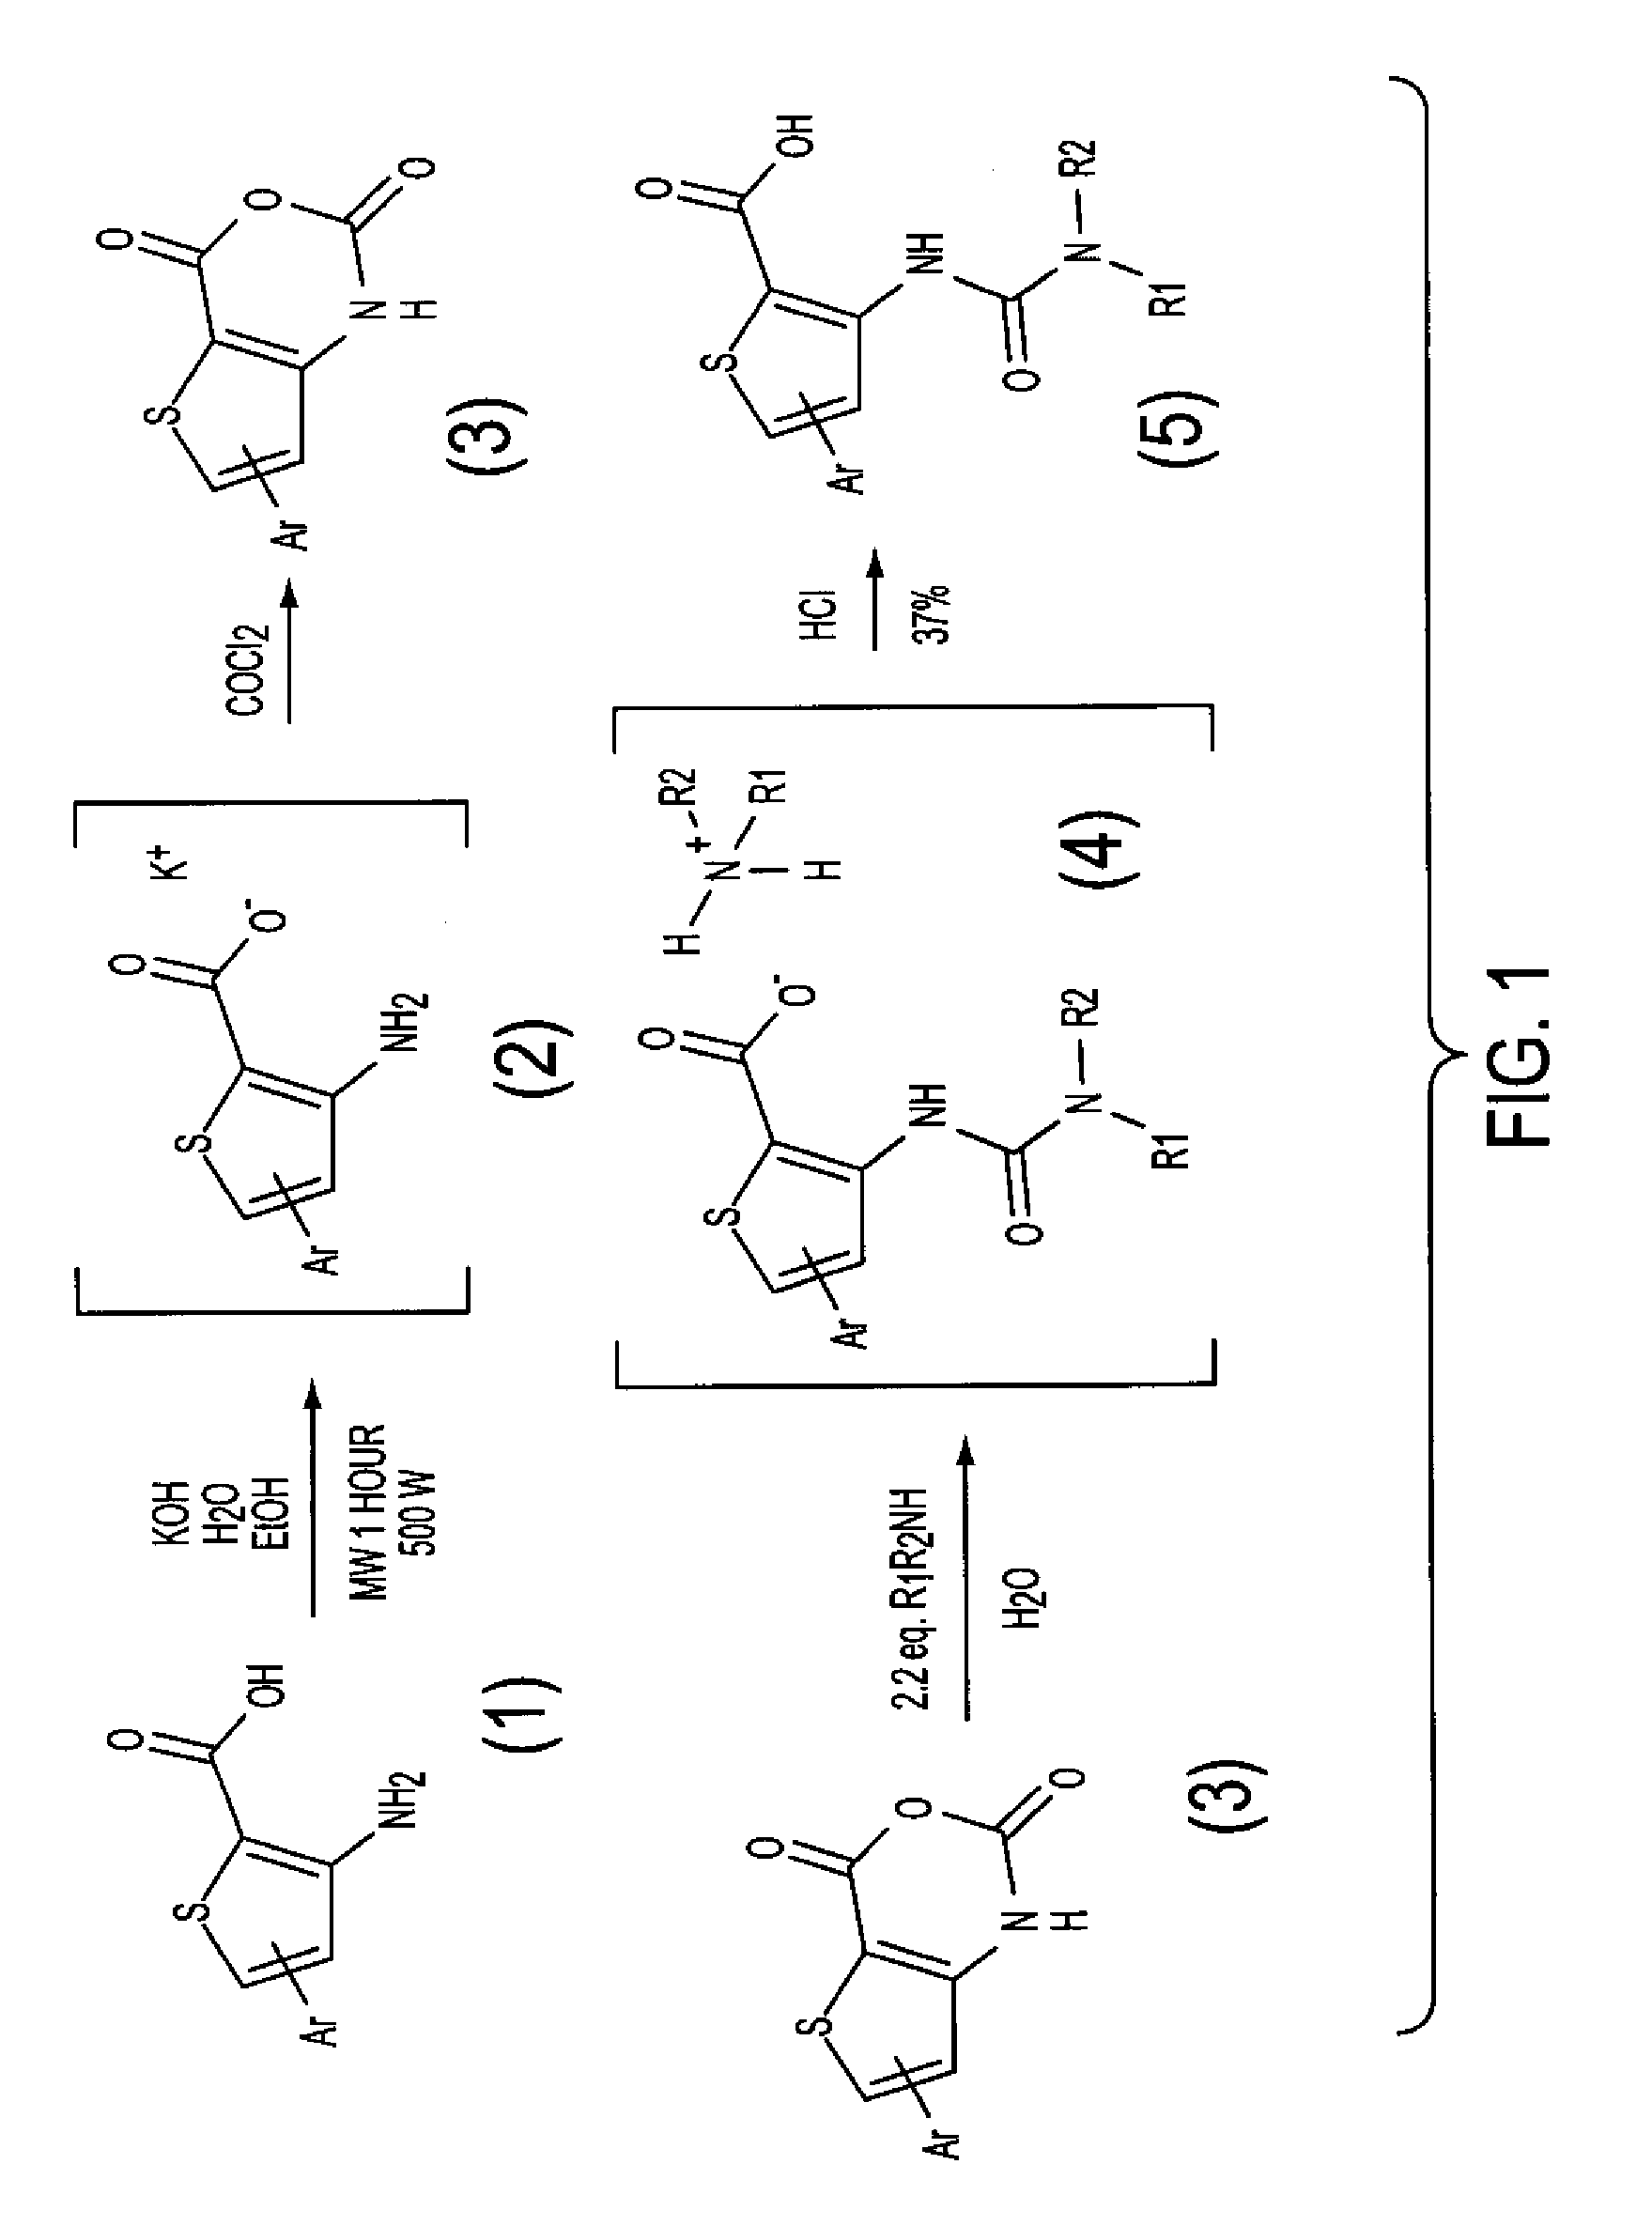 Methods of identifying compounds that inhibit the activation of a biomolecule and methods of treatment using the compounds